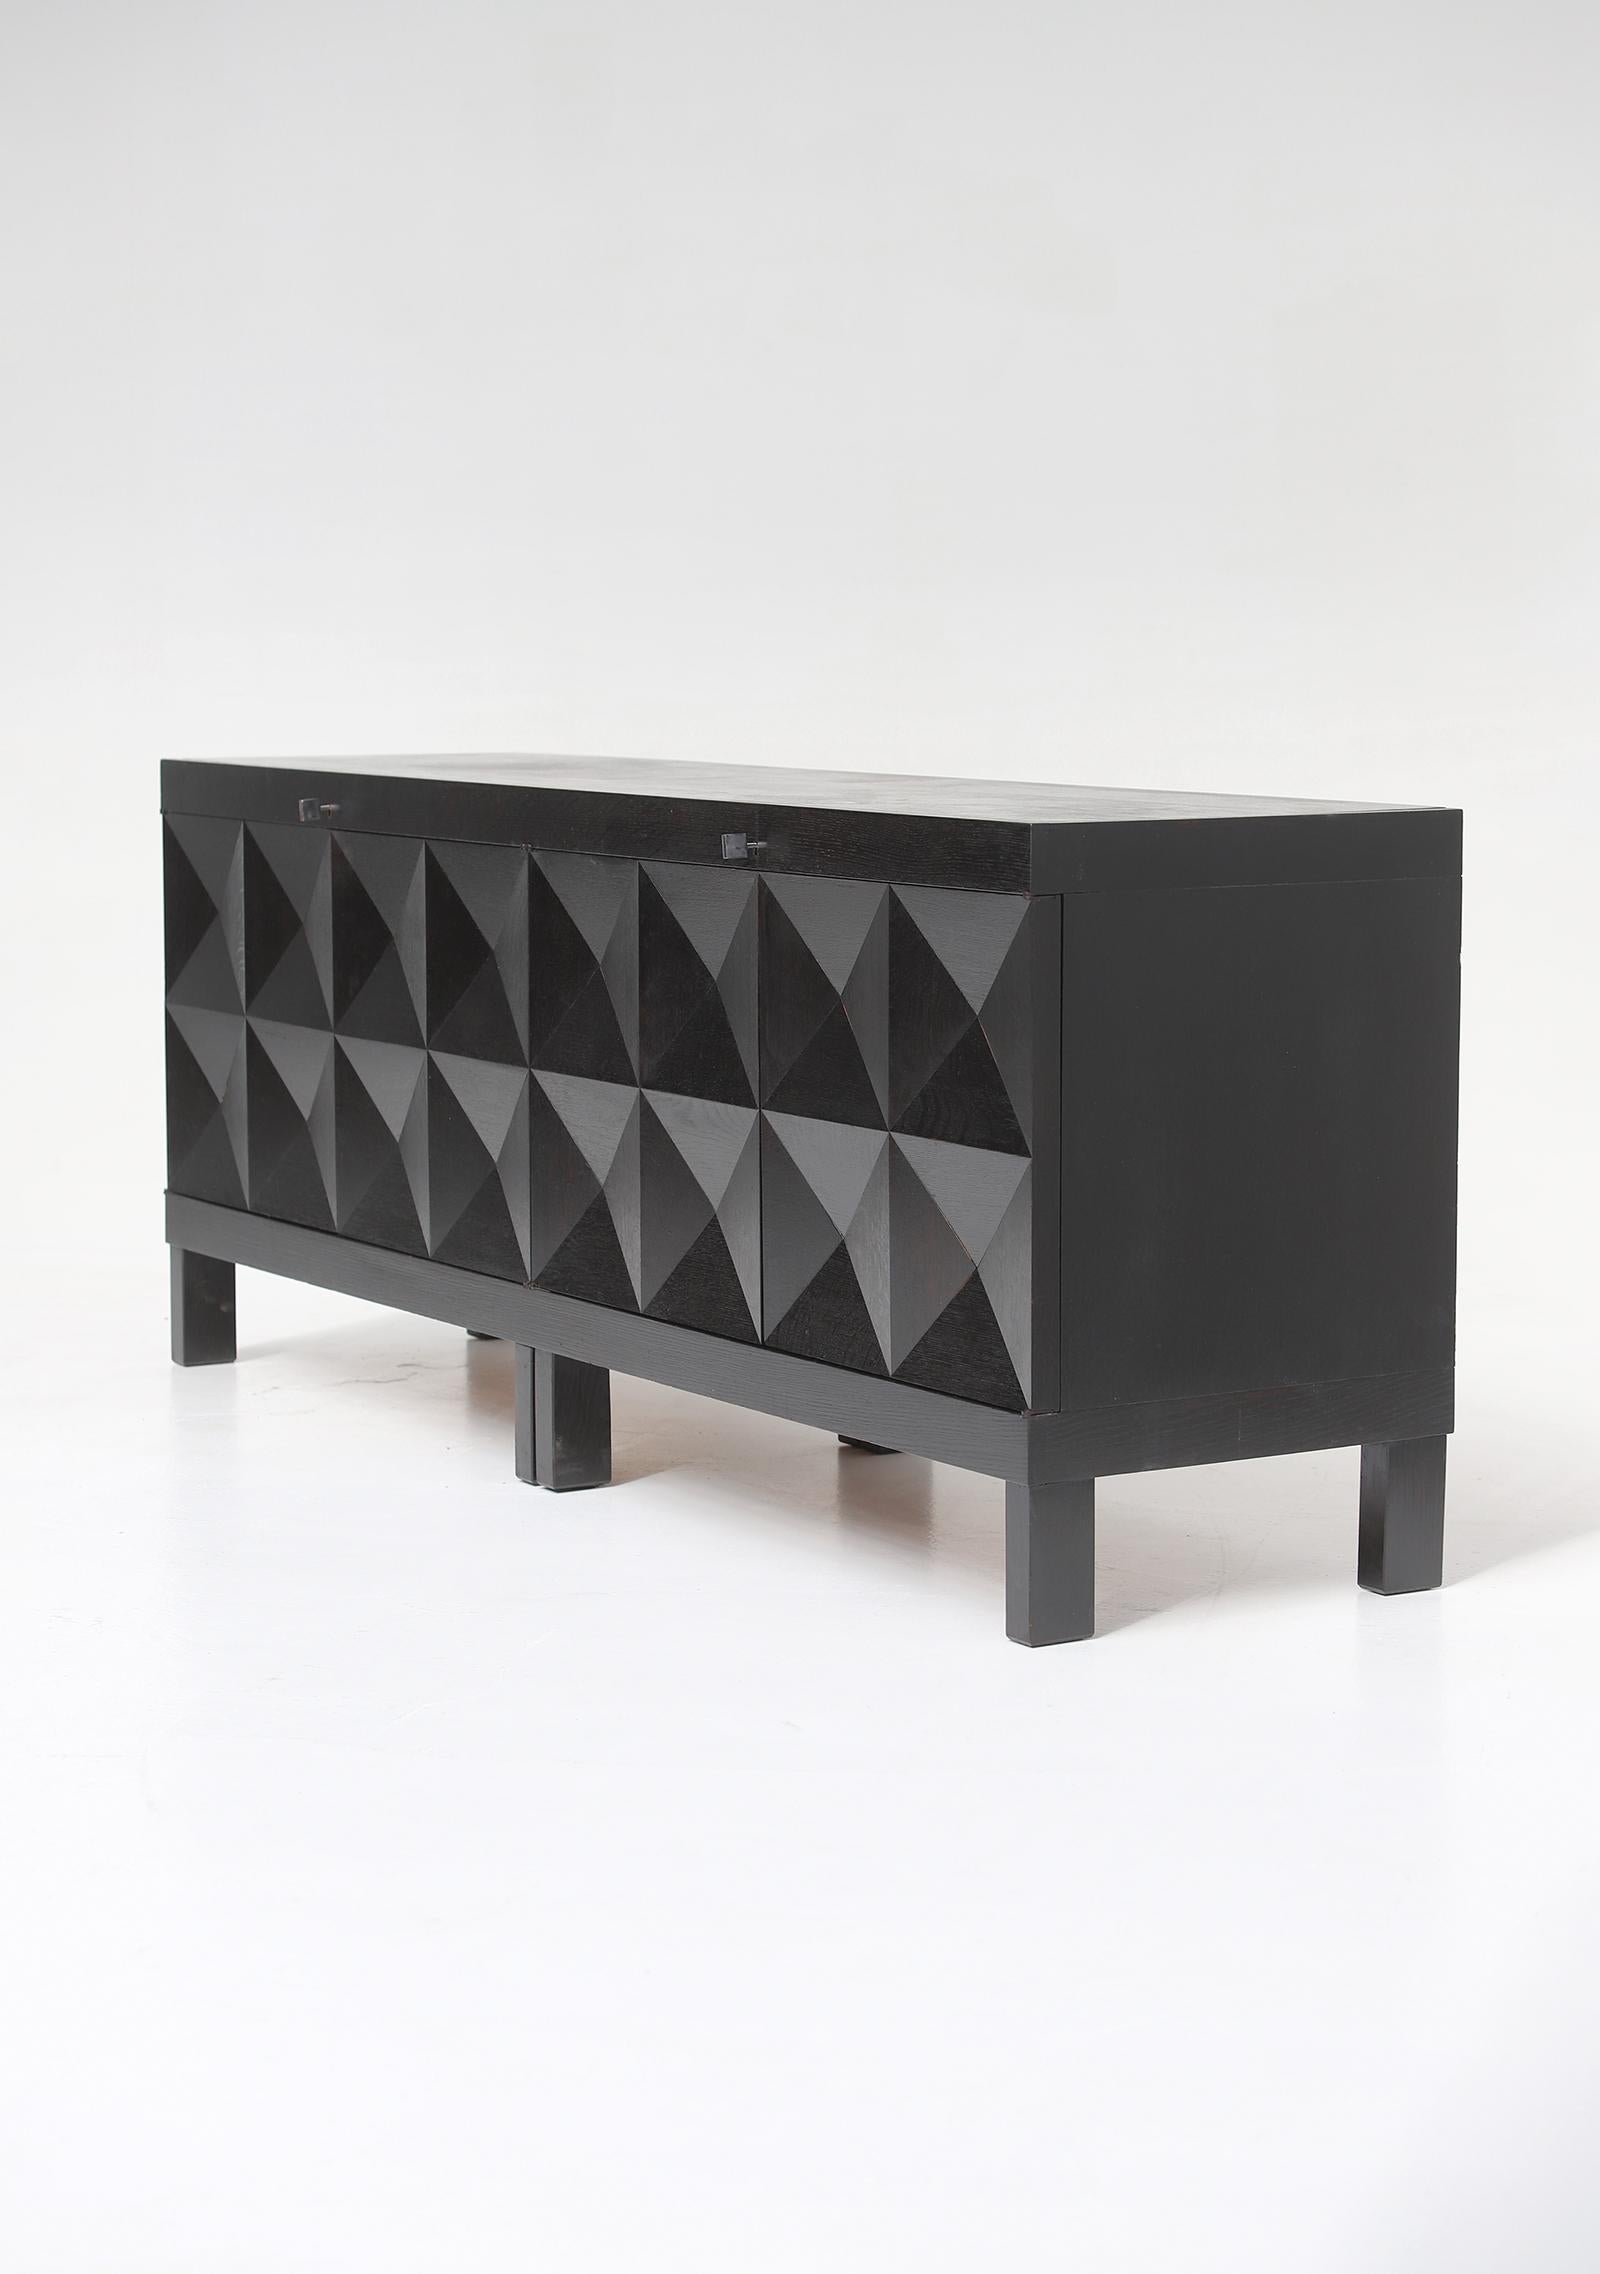 Mid-20th Century Brutalist black sideboard with graphic patterned doors for MI, Belgium 1969